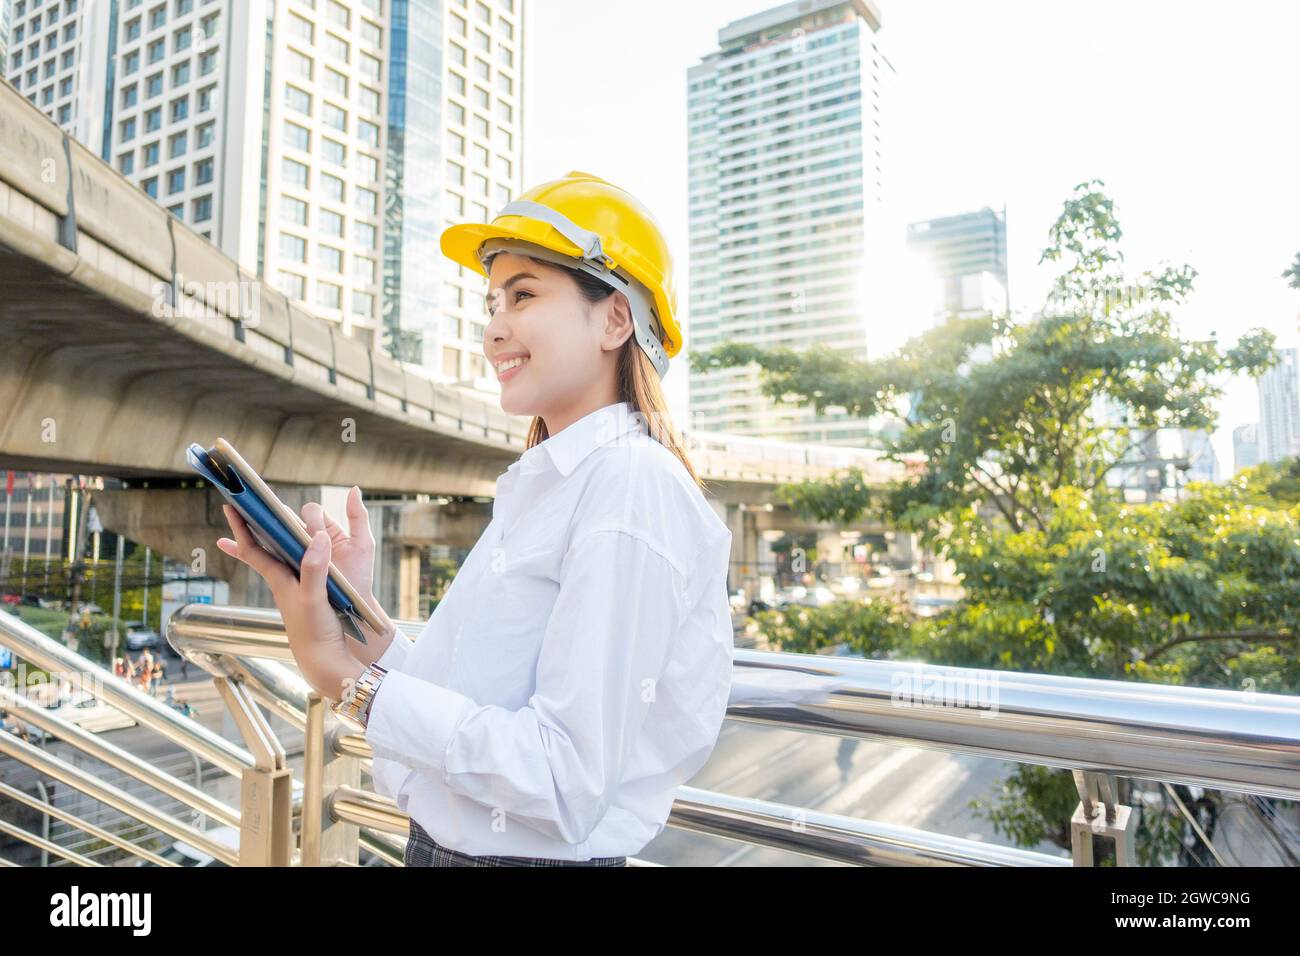 Architect Holding Digital Tablet While Standing By Railing In City Stock Photo